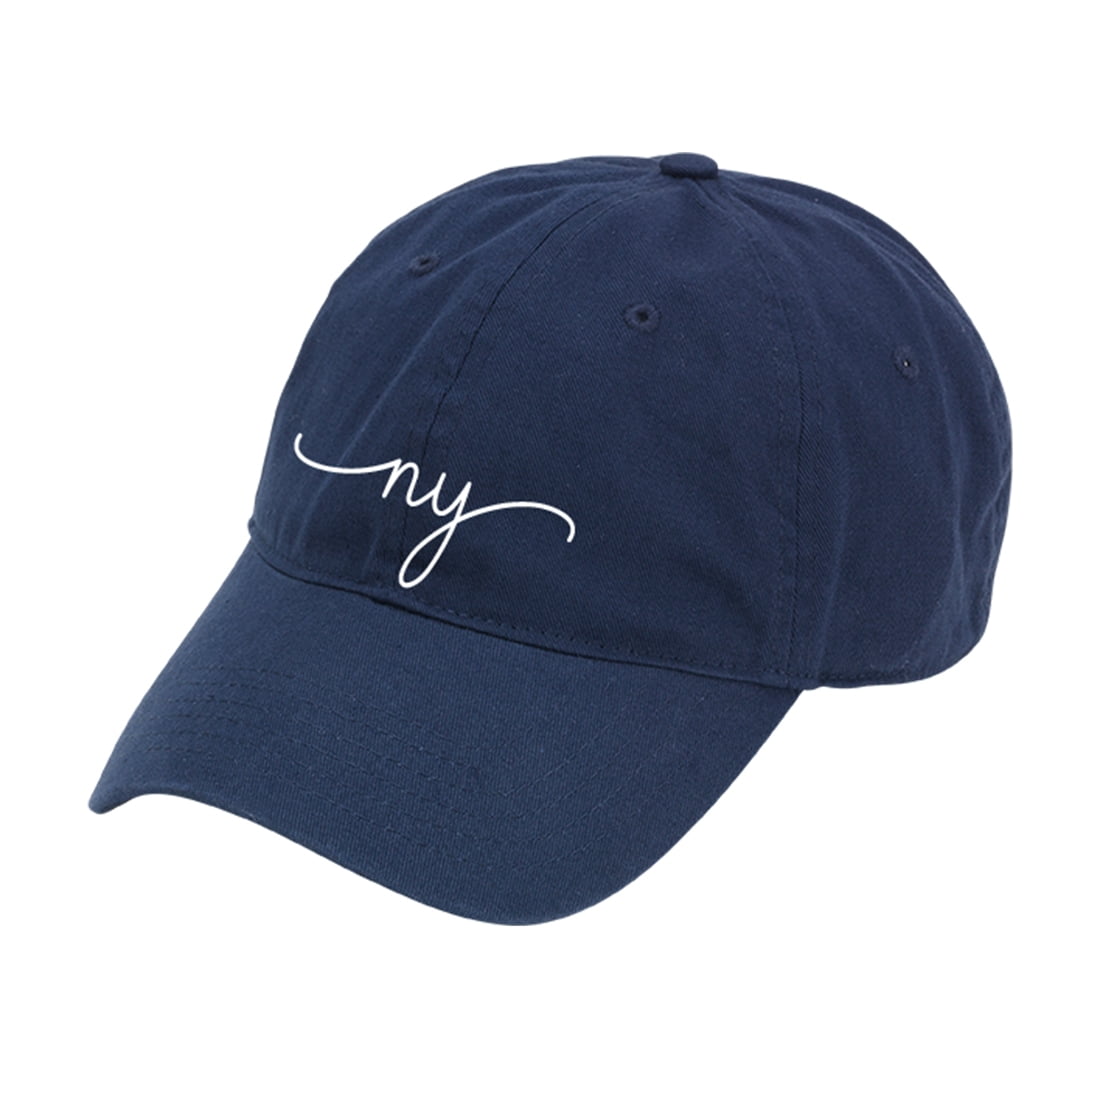 New York Rep Your State Navy Cap